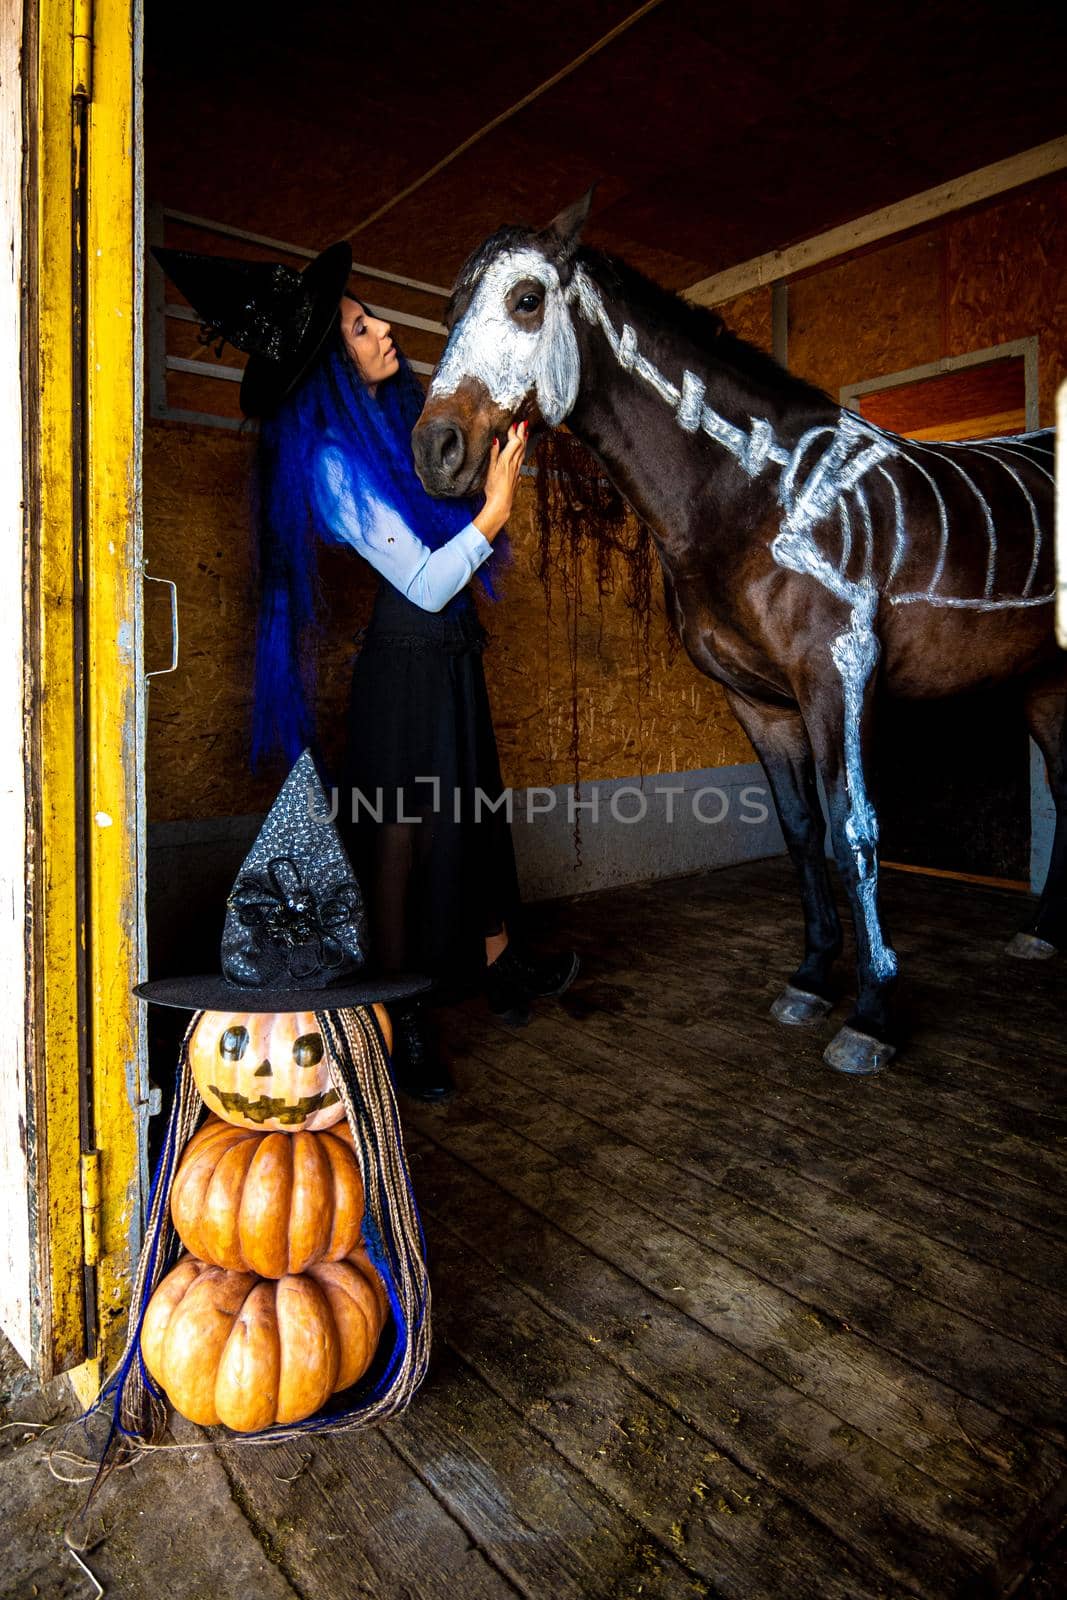 A girl dressed as a witch looks at a horse on which a skeleton is painted in white paint, in the foreground is an evil figurine of pumpkins by Madhourse